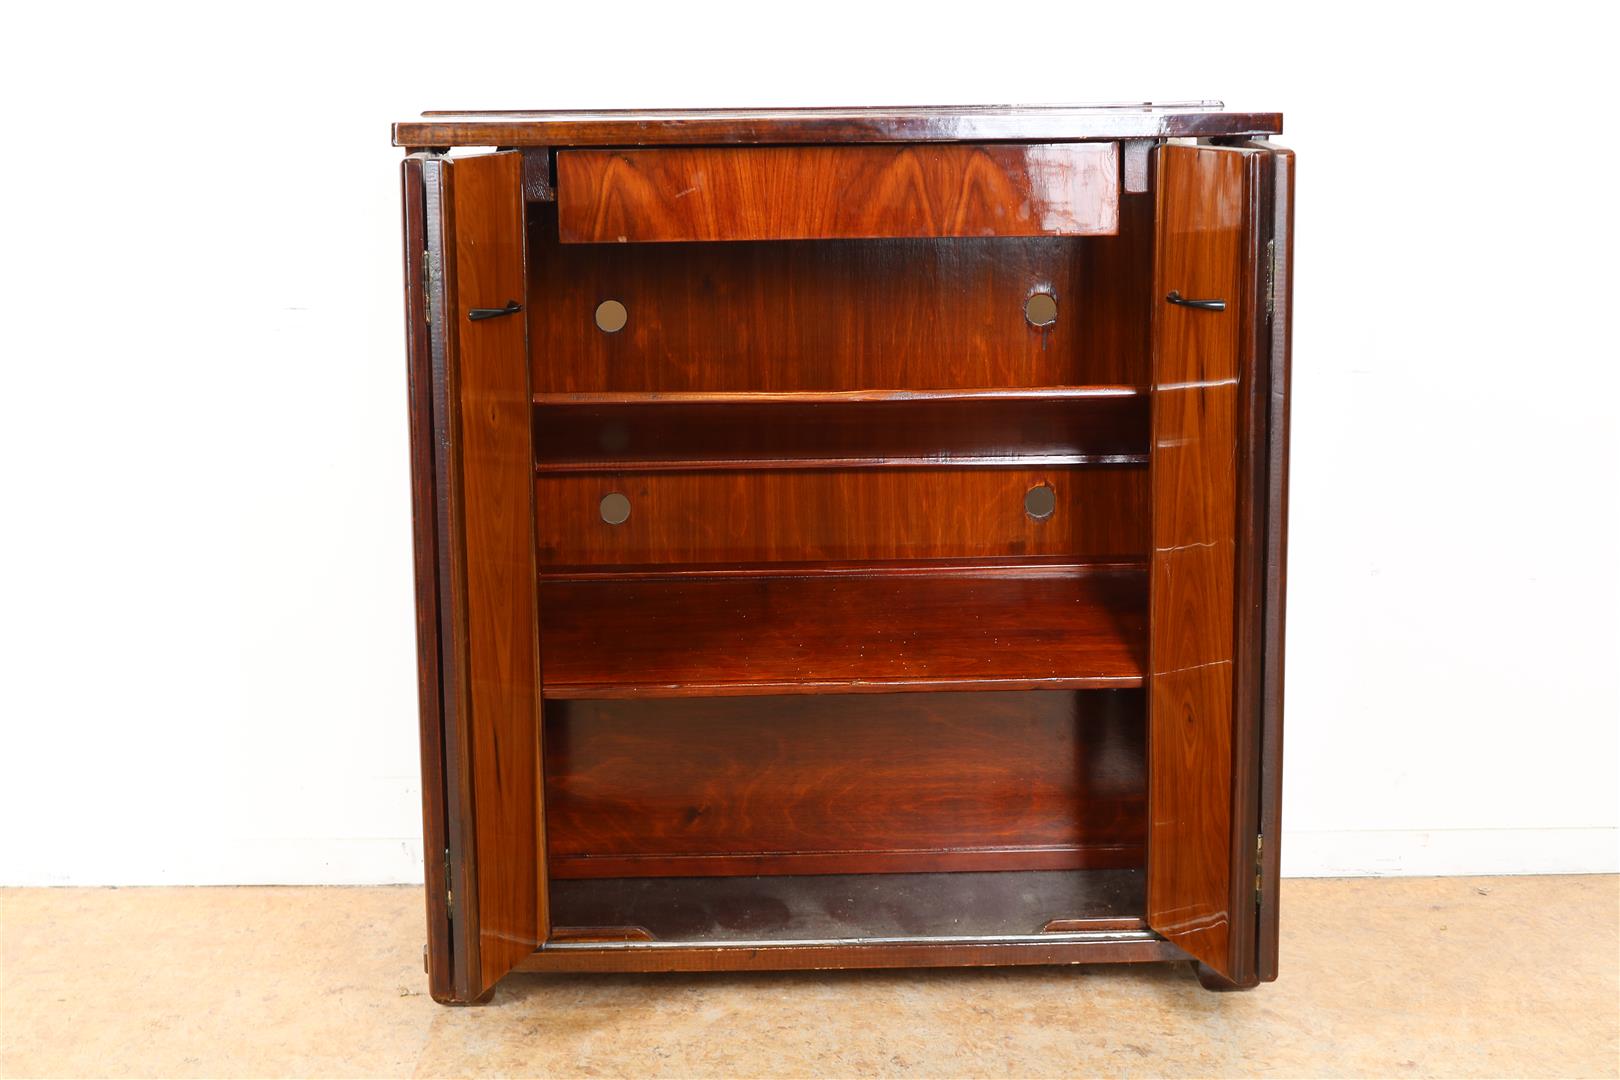 Mahogany veneered shoe cabinet with 2 shutter doors and internal drawer and sloping shelves, 83 x 90 - Image 2 of 4